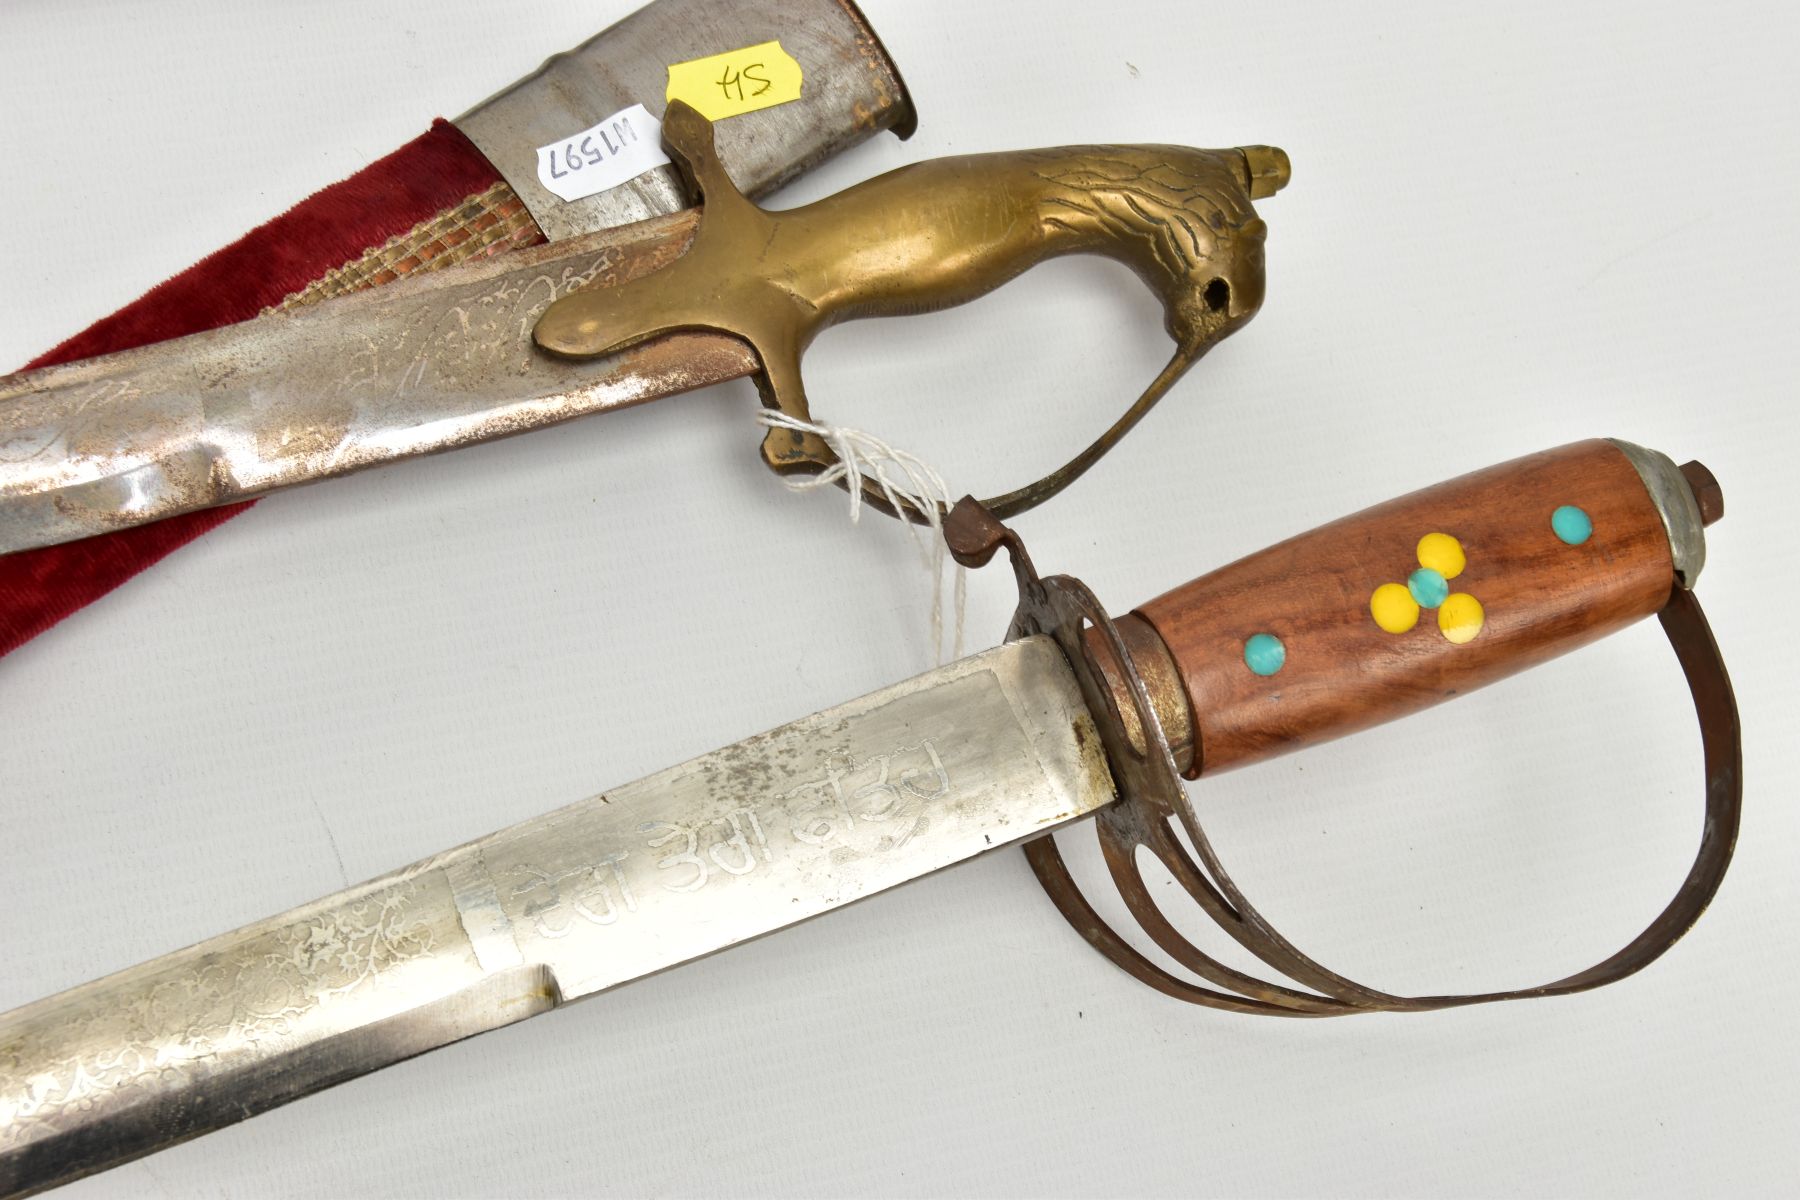 TWO ASIAN/INDIAN TOURIST STYLE CURVED SWORDS in wooden and suede scabbards, one id marked made in - Image 10 of 13